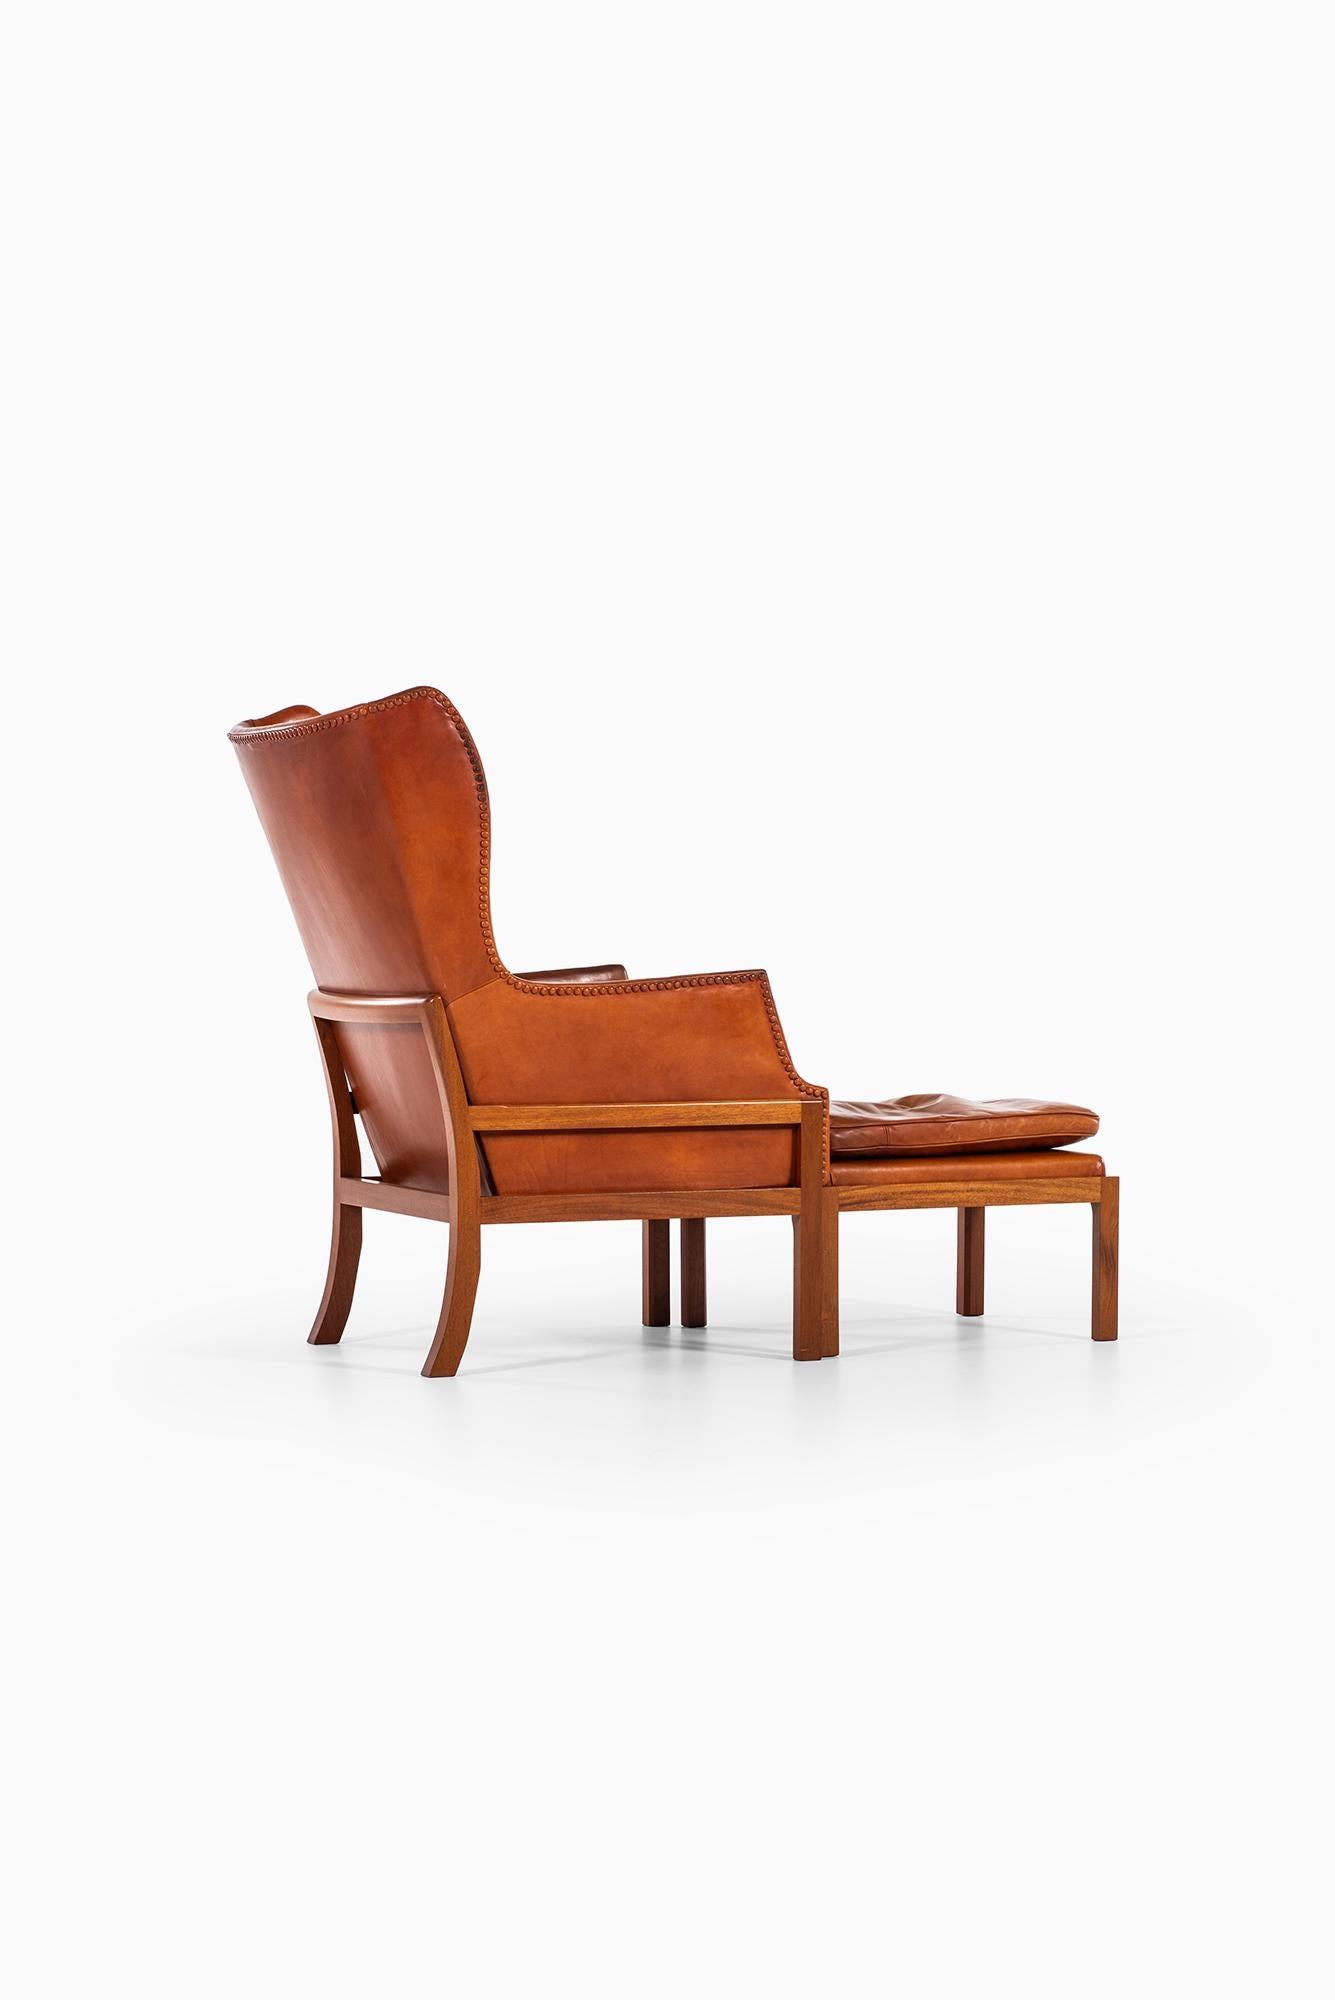 Mogens Koch Wing-Back Lounge Chair with Stool by Cabinetmaker Rud Rasmussen 1